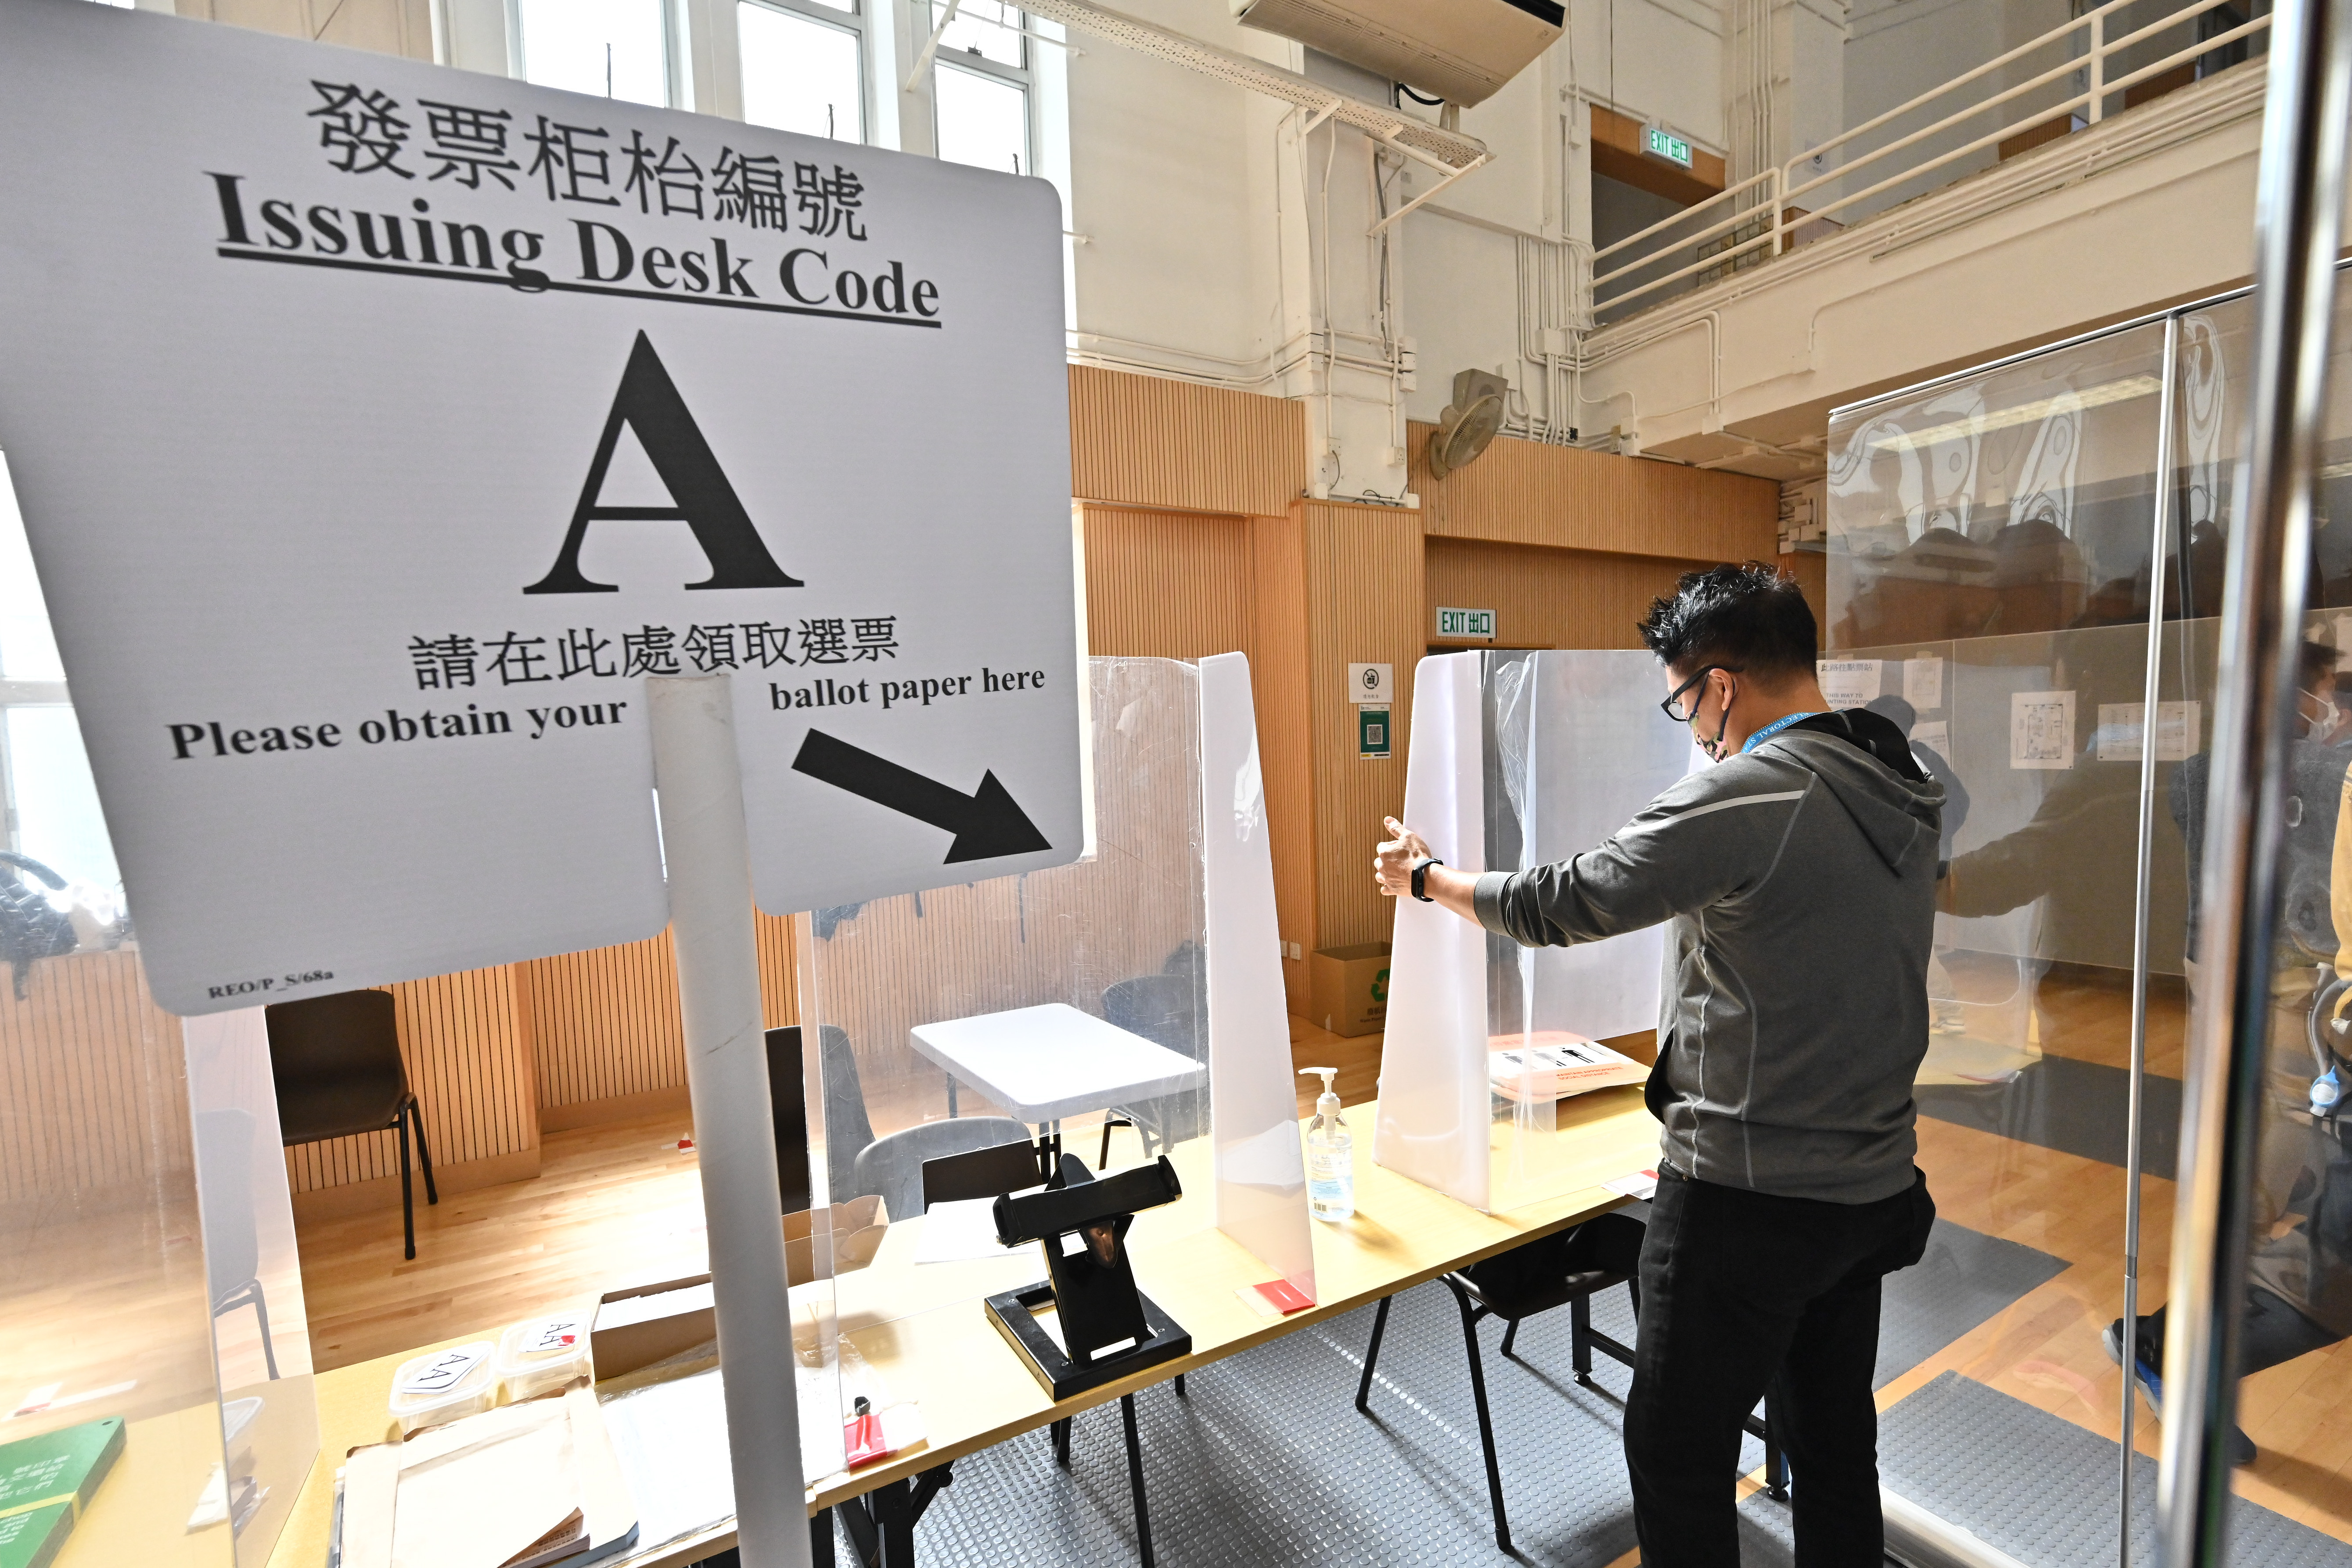 The 2021 Legislative Council General Election will be held on December 19. The Registration and Electoral Office (REO) arranged in the past two weeks training and practice sessions with simulated scenarios for staff who will work in polling, counting and central counting stations. Photo shows a representative from the REO demonstrating the set-up of a polling station.